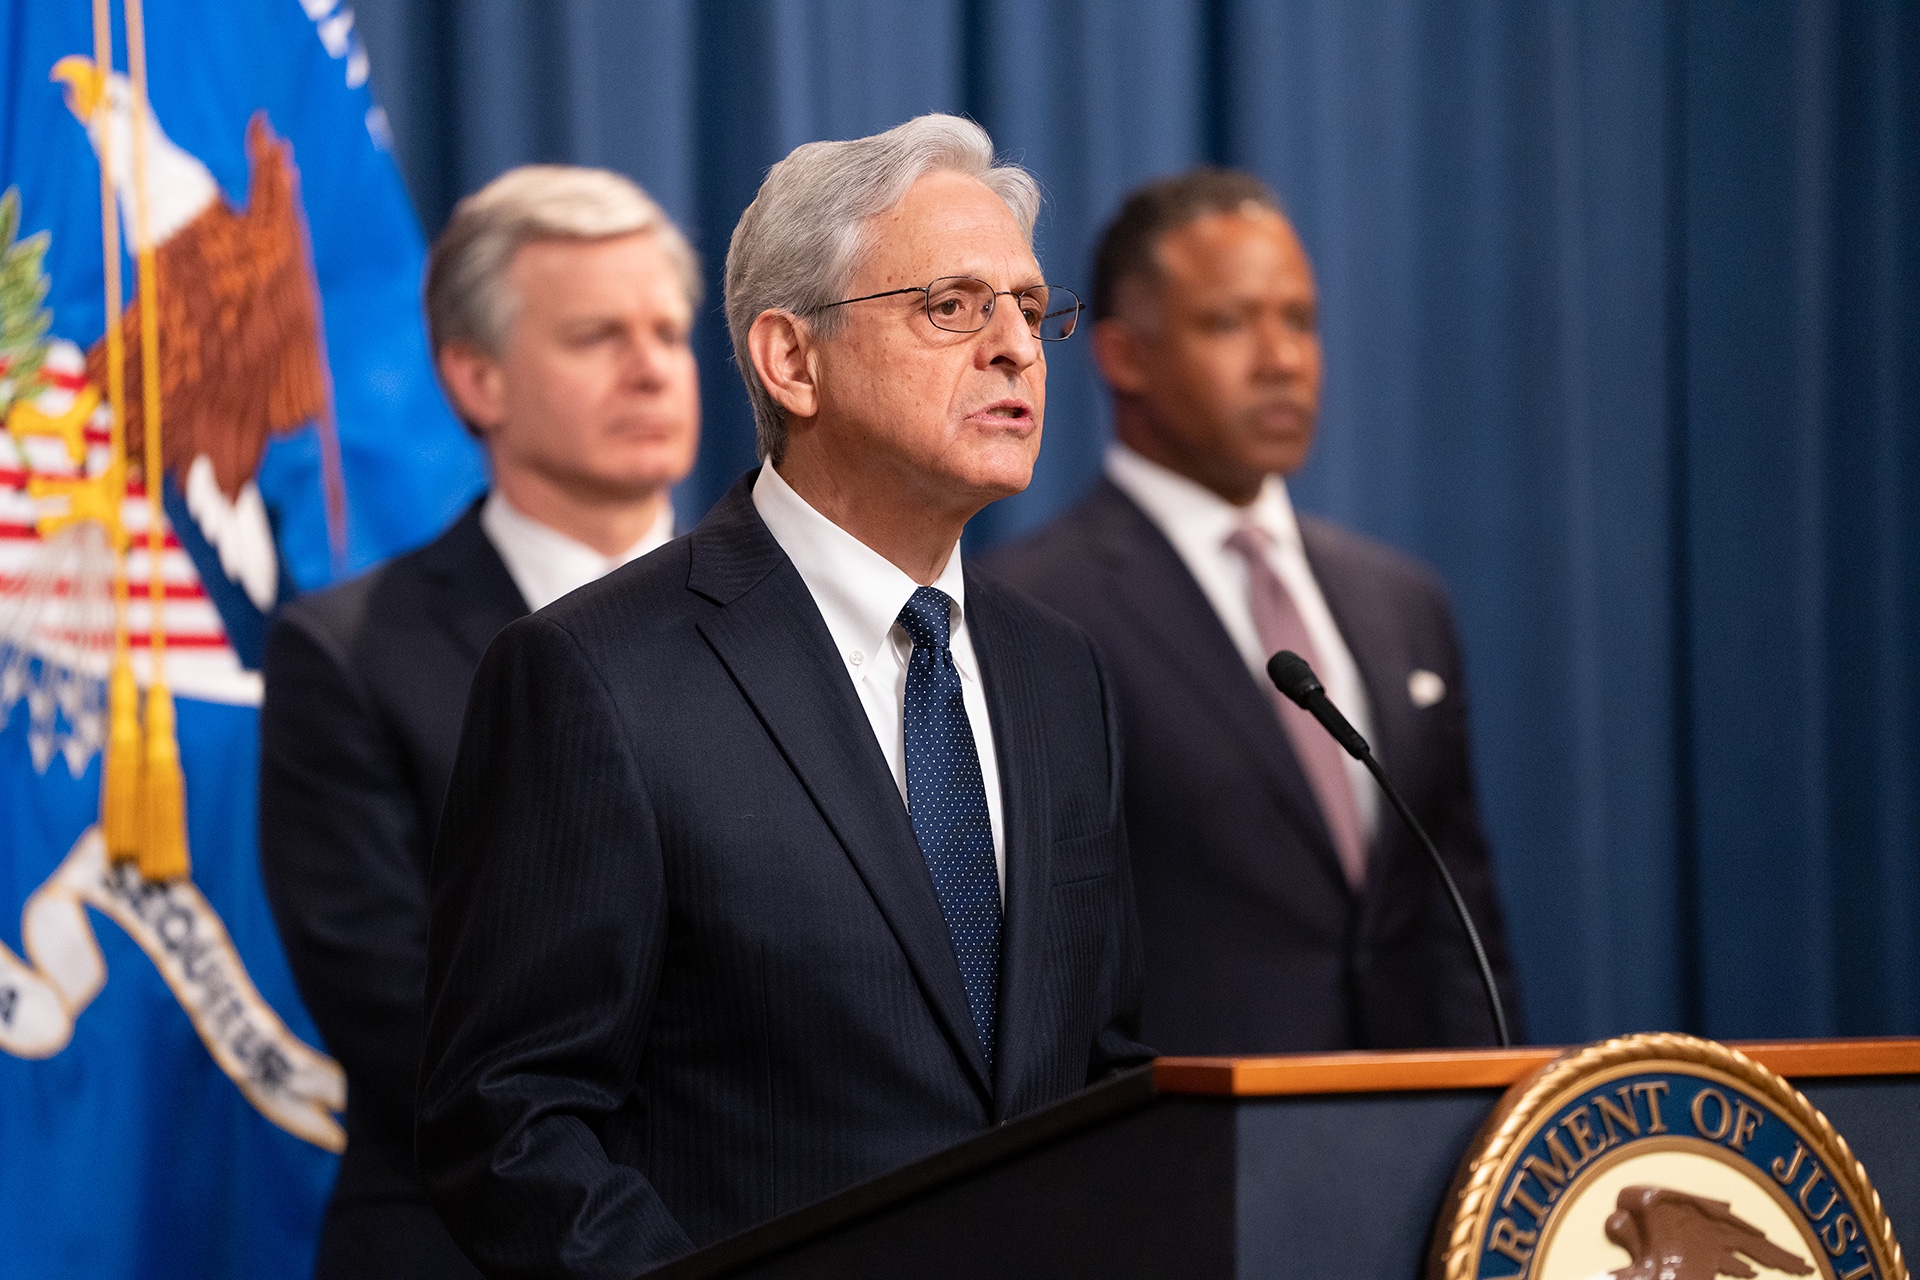 Attorney General Merrick B. Garland delivers remarks from a podium at the Department of Justice. Behind him stand FBI Director Christopher Wray (left) and Assistant Attorney General for the Criminal Division Kenneth A. Polite, Jr. (right)